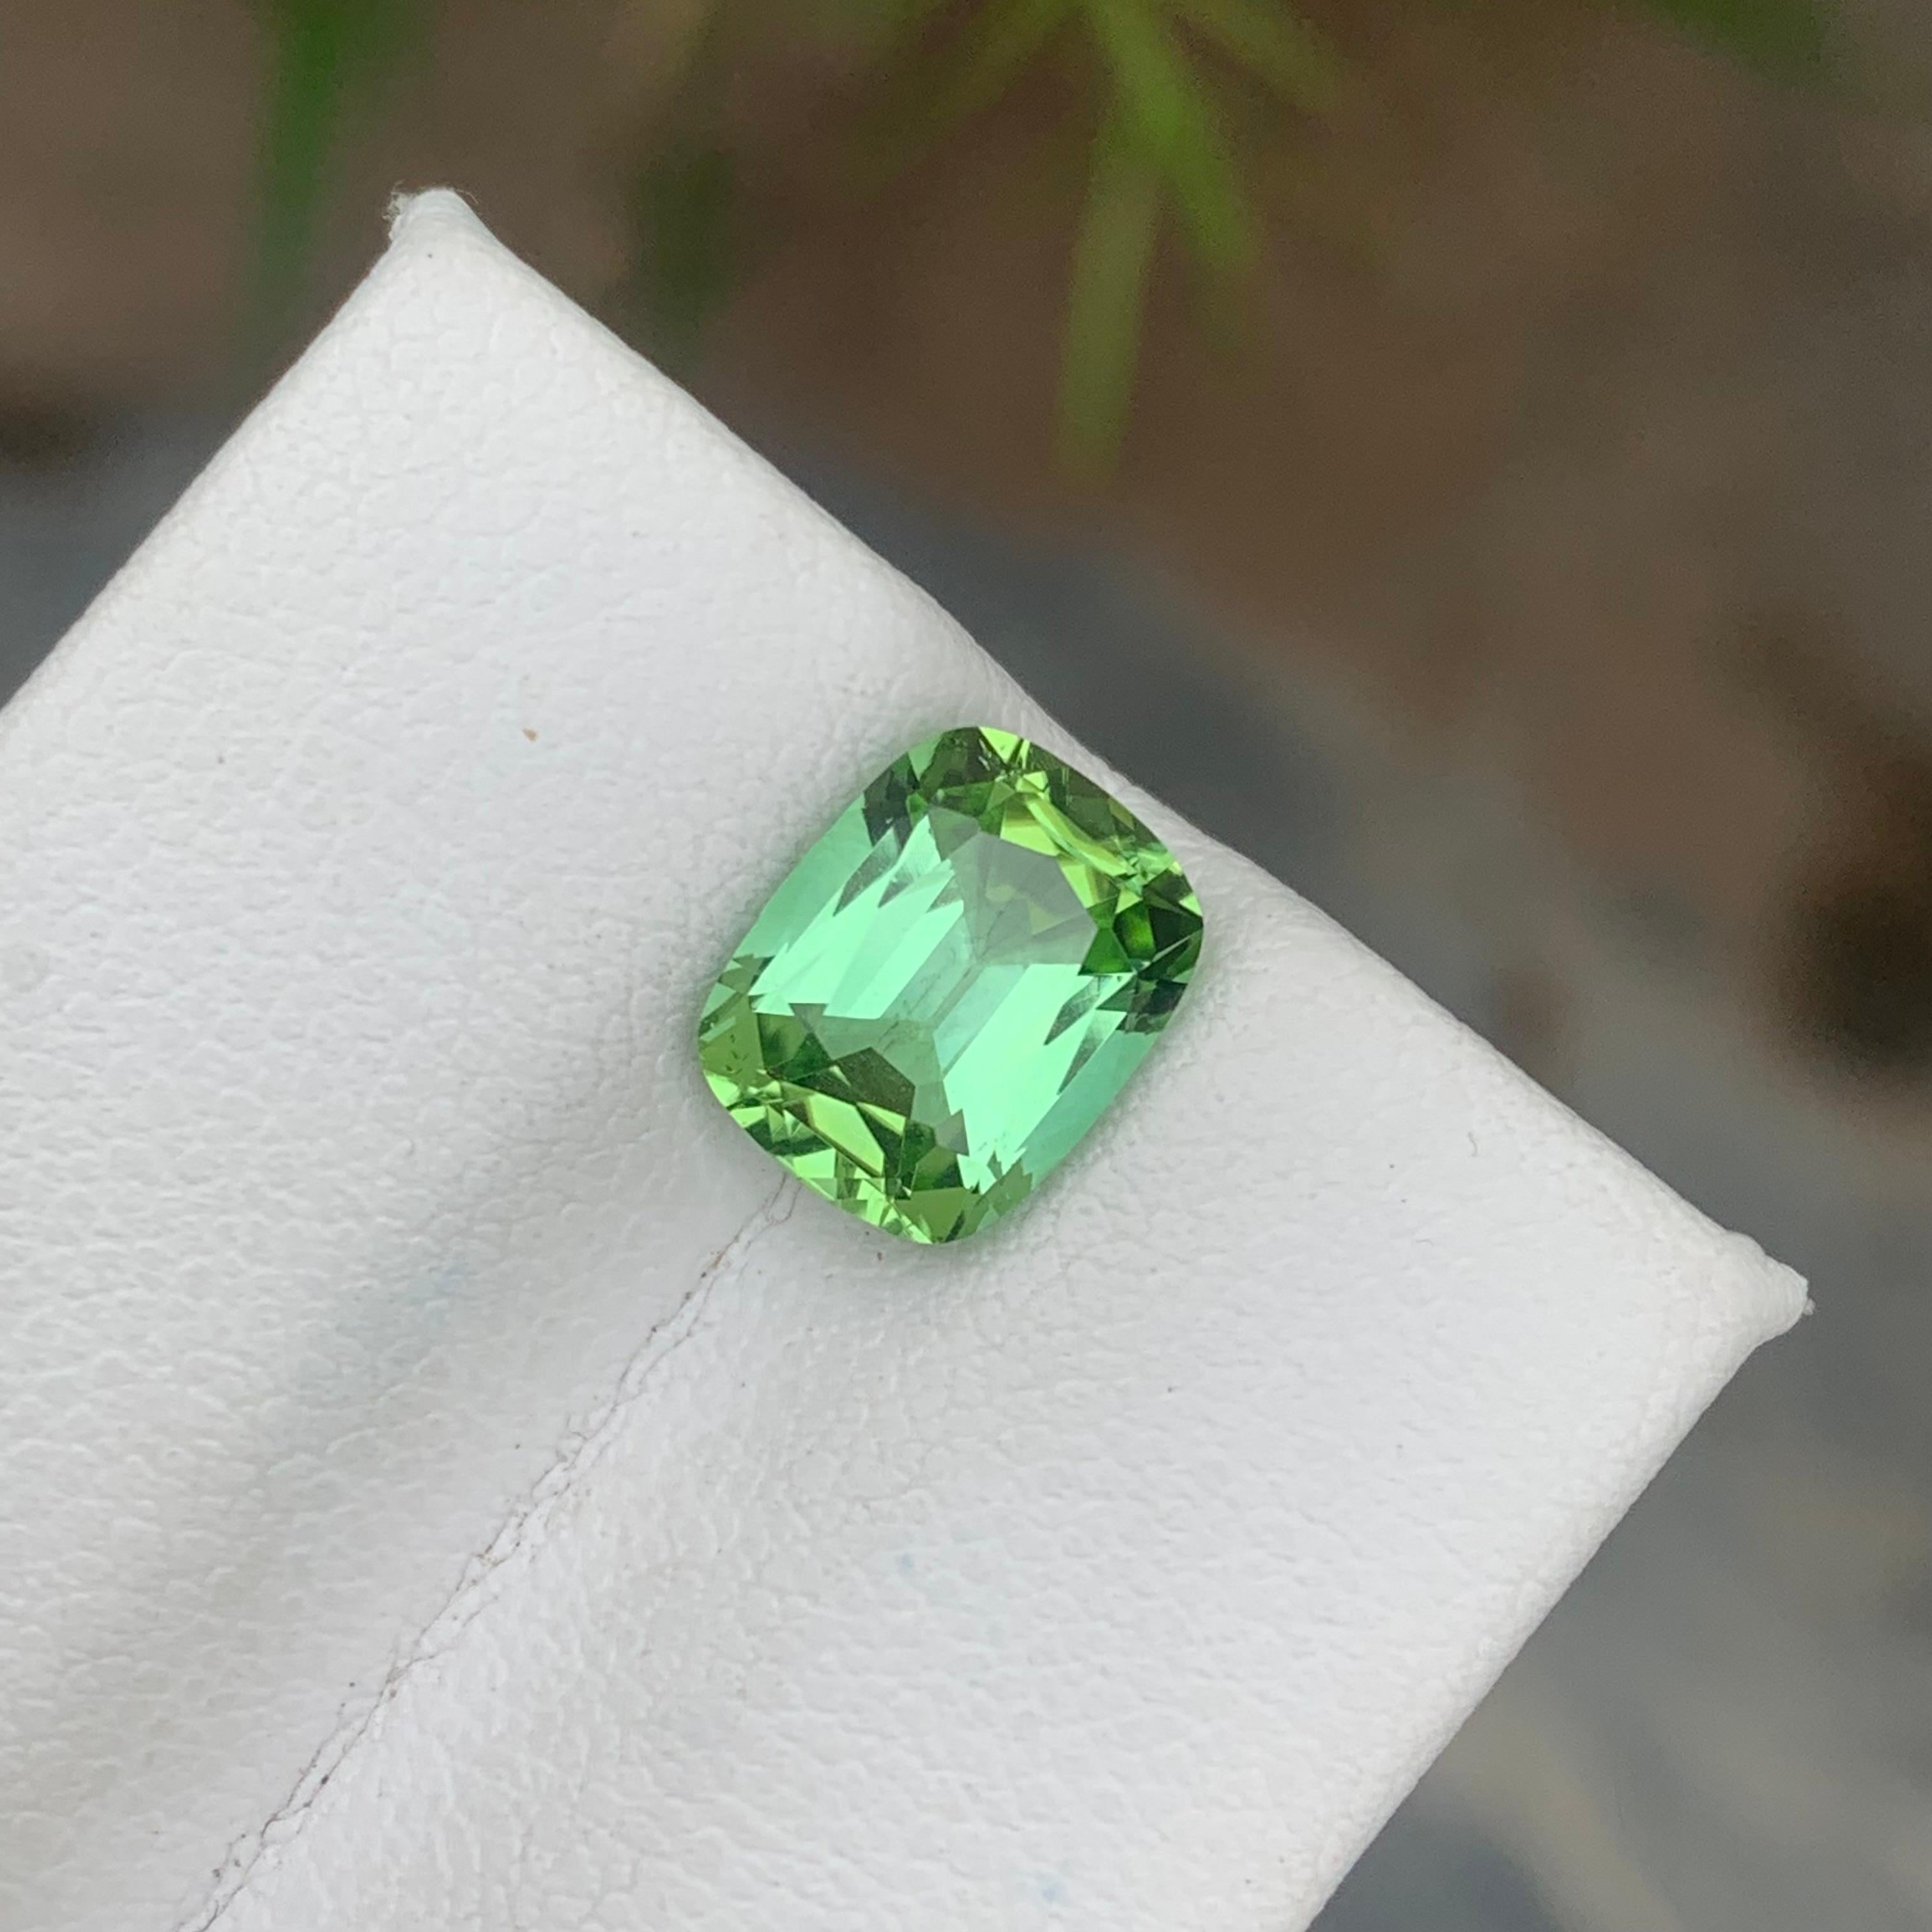 Stunning 2.65 Carat Natural Loose Tourmaline Ring Cushion Cut From Afghanistan For Sale 3